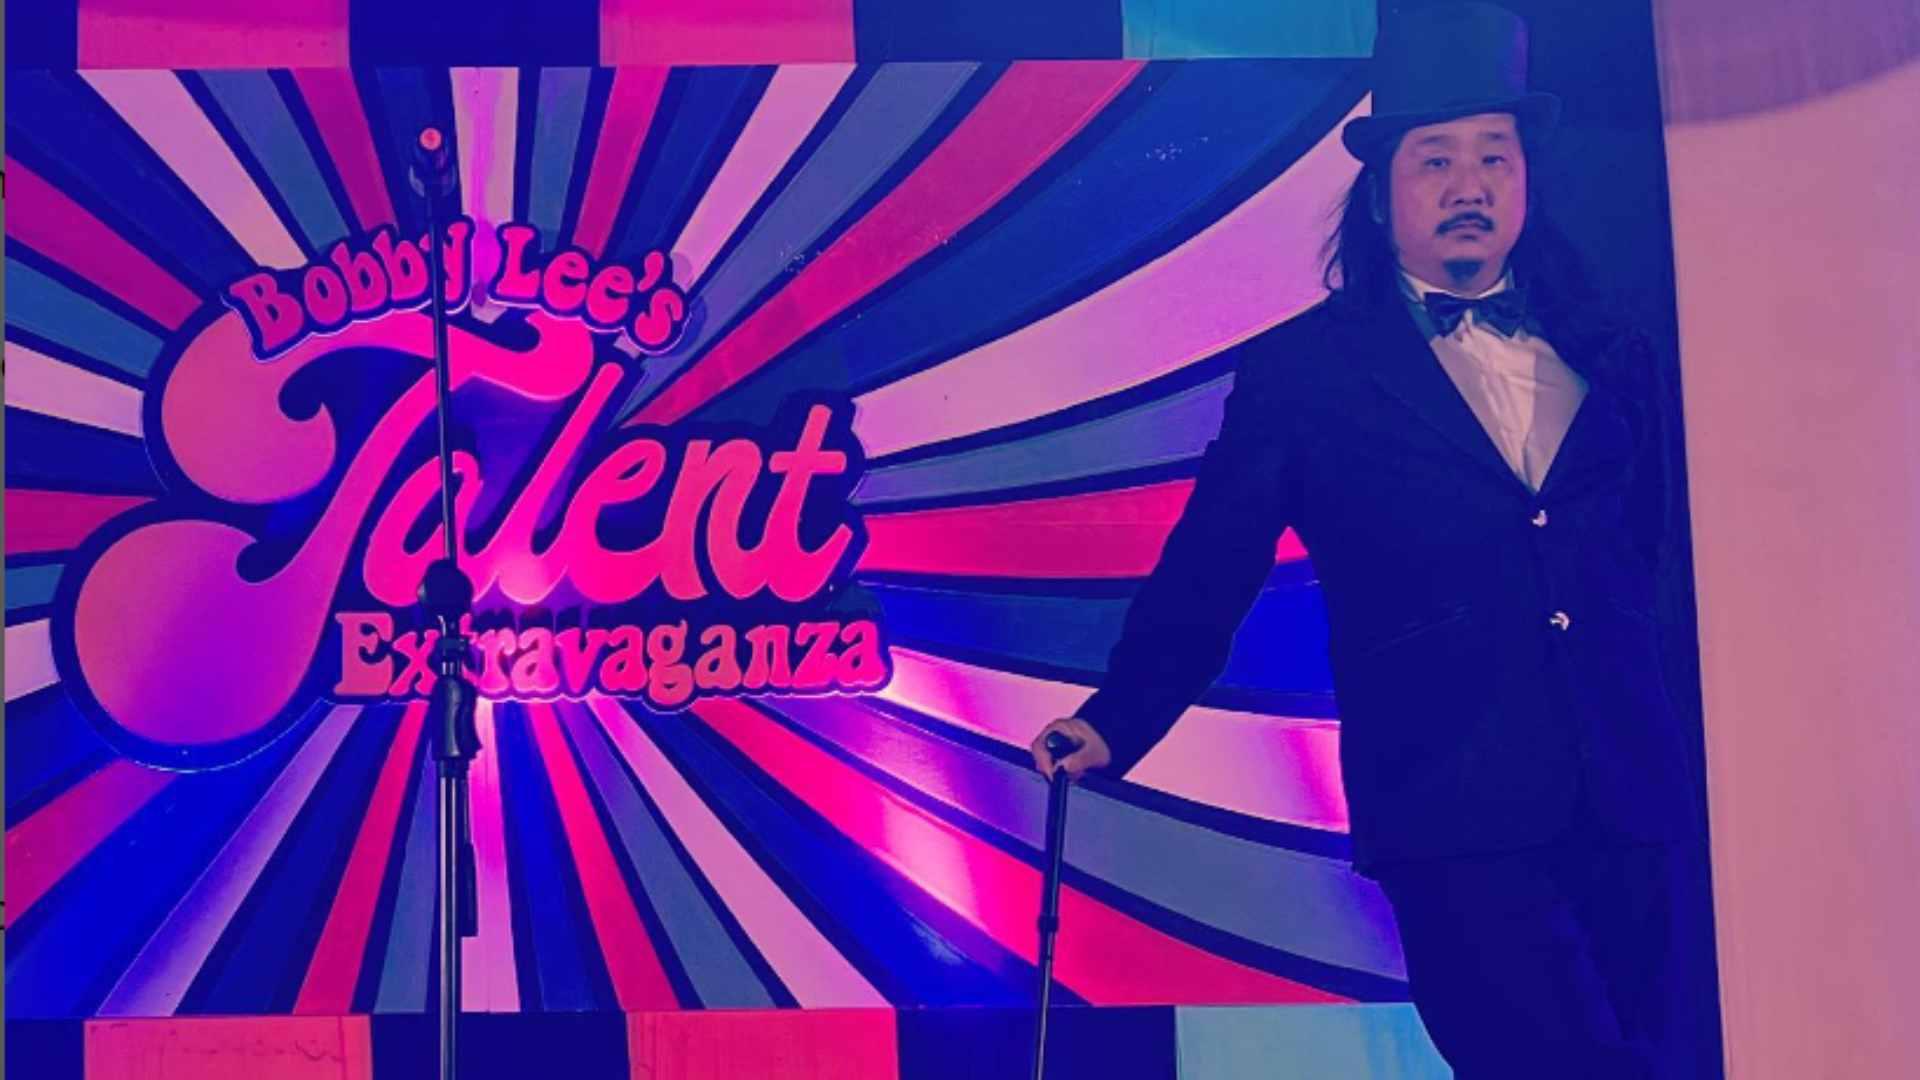 How does Bobby Lee spend his Net worth?